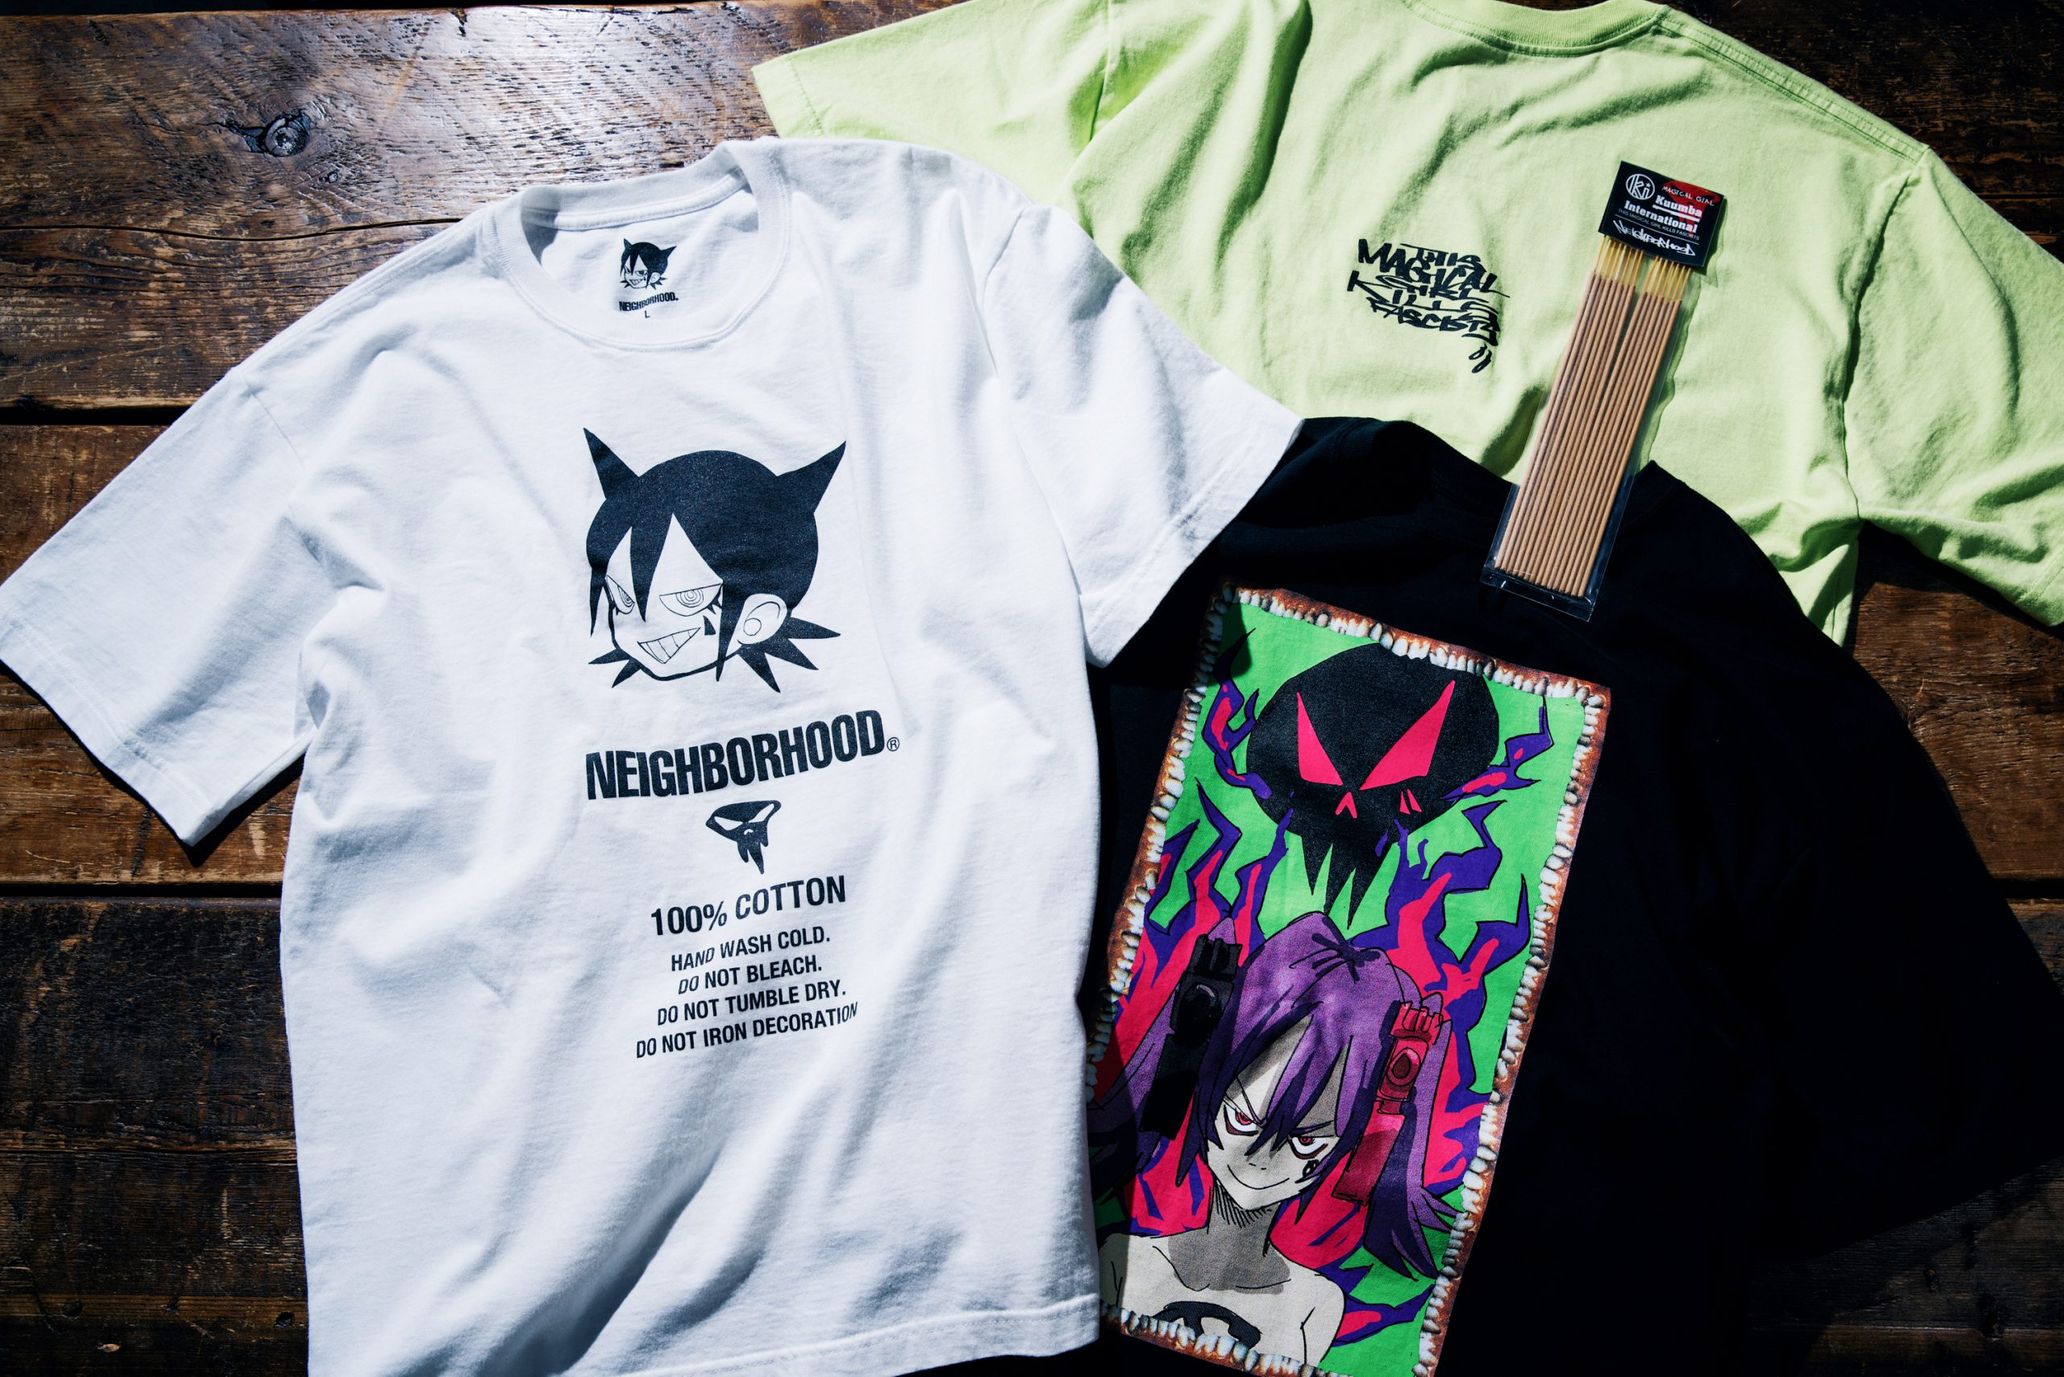 Some of the JUN INAGAWA x NEIGHBORHOOD items to be released this time. Other items include figures painted by JUN INAGAWA himself and T shirts